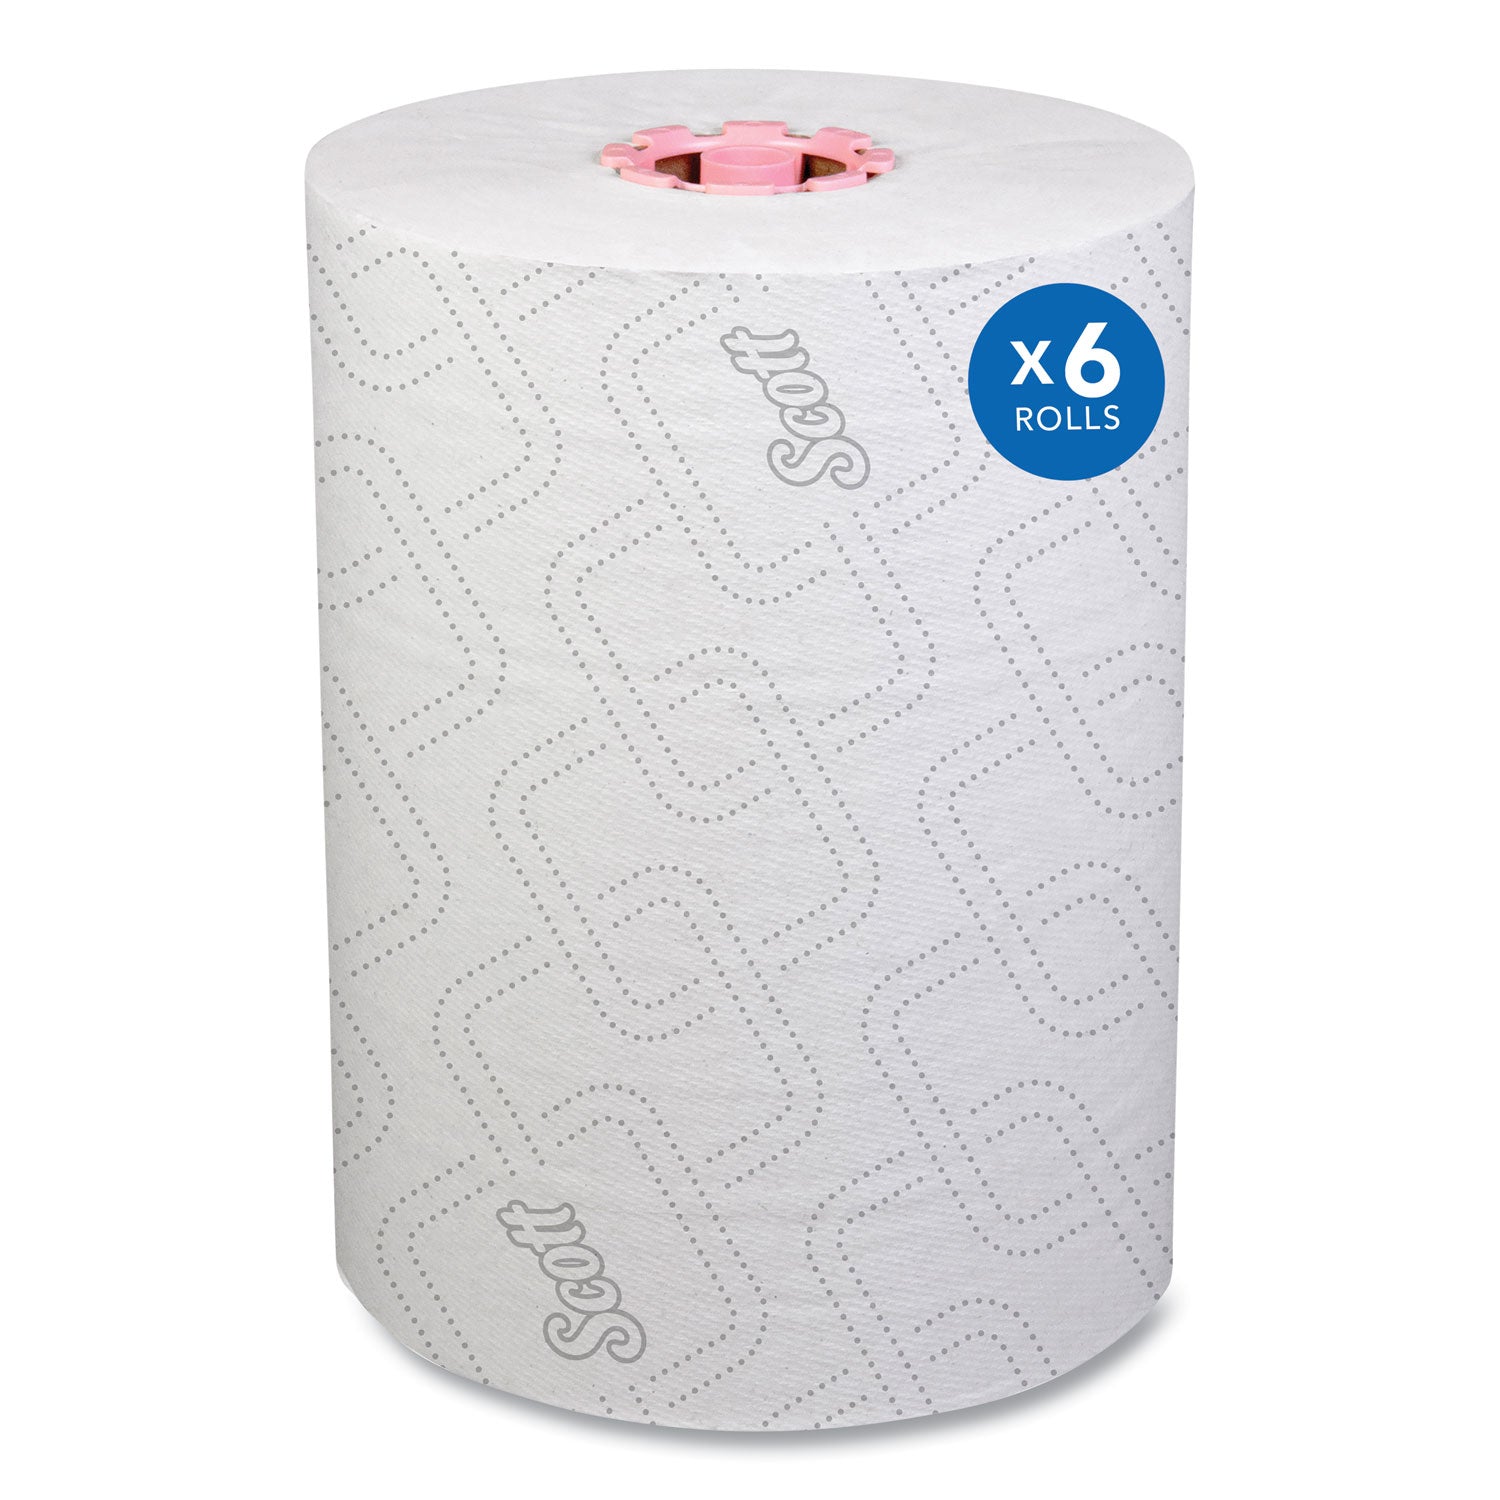 slimroll-towels-1-ply-8-x-580-ft-white-pink-core-traditional-business-6-rolls-carton_kcc47032 - 1